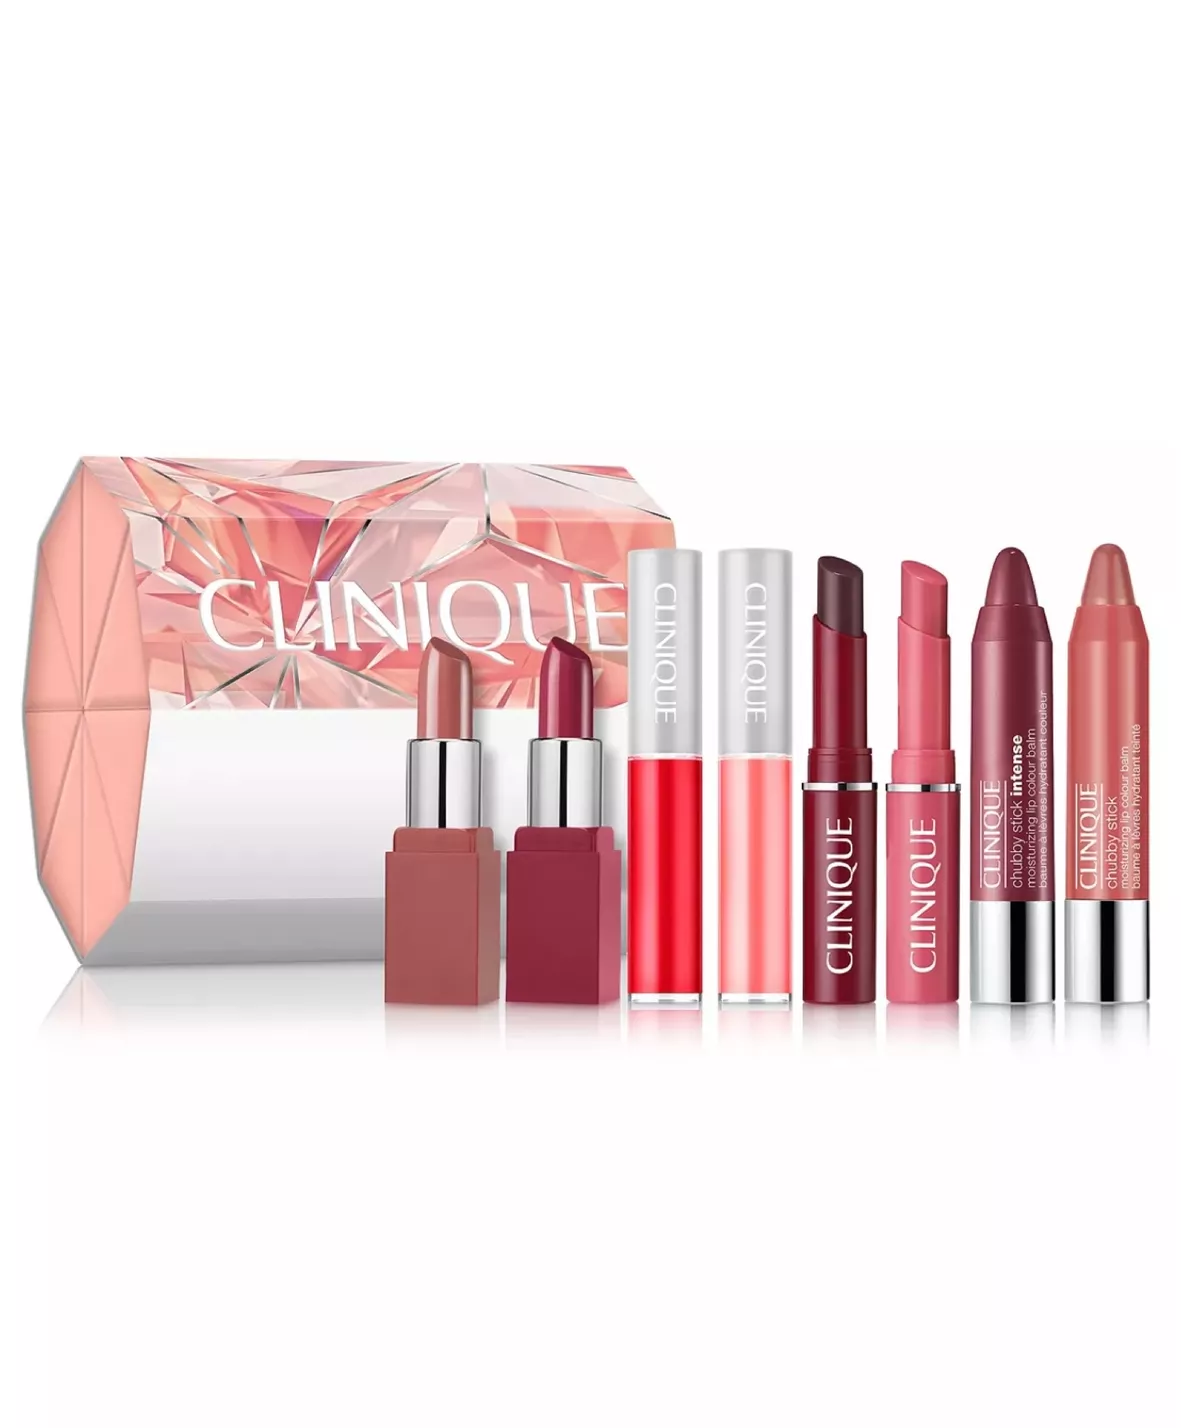 Quench & Restore 4 Piece Superfood Lipstick and Gloss Collection